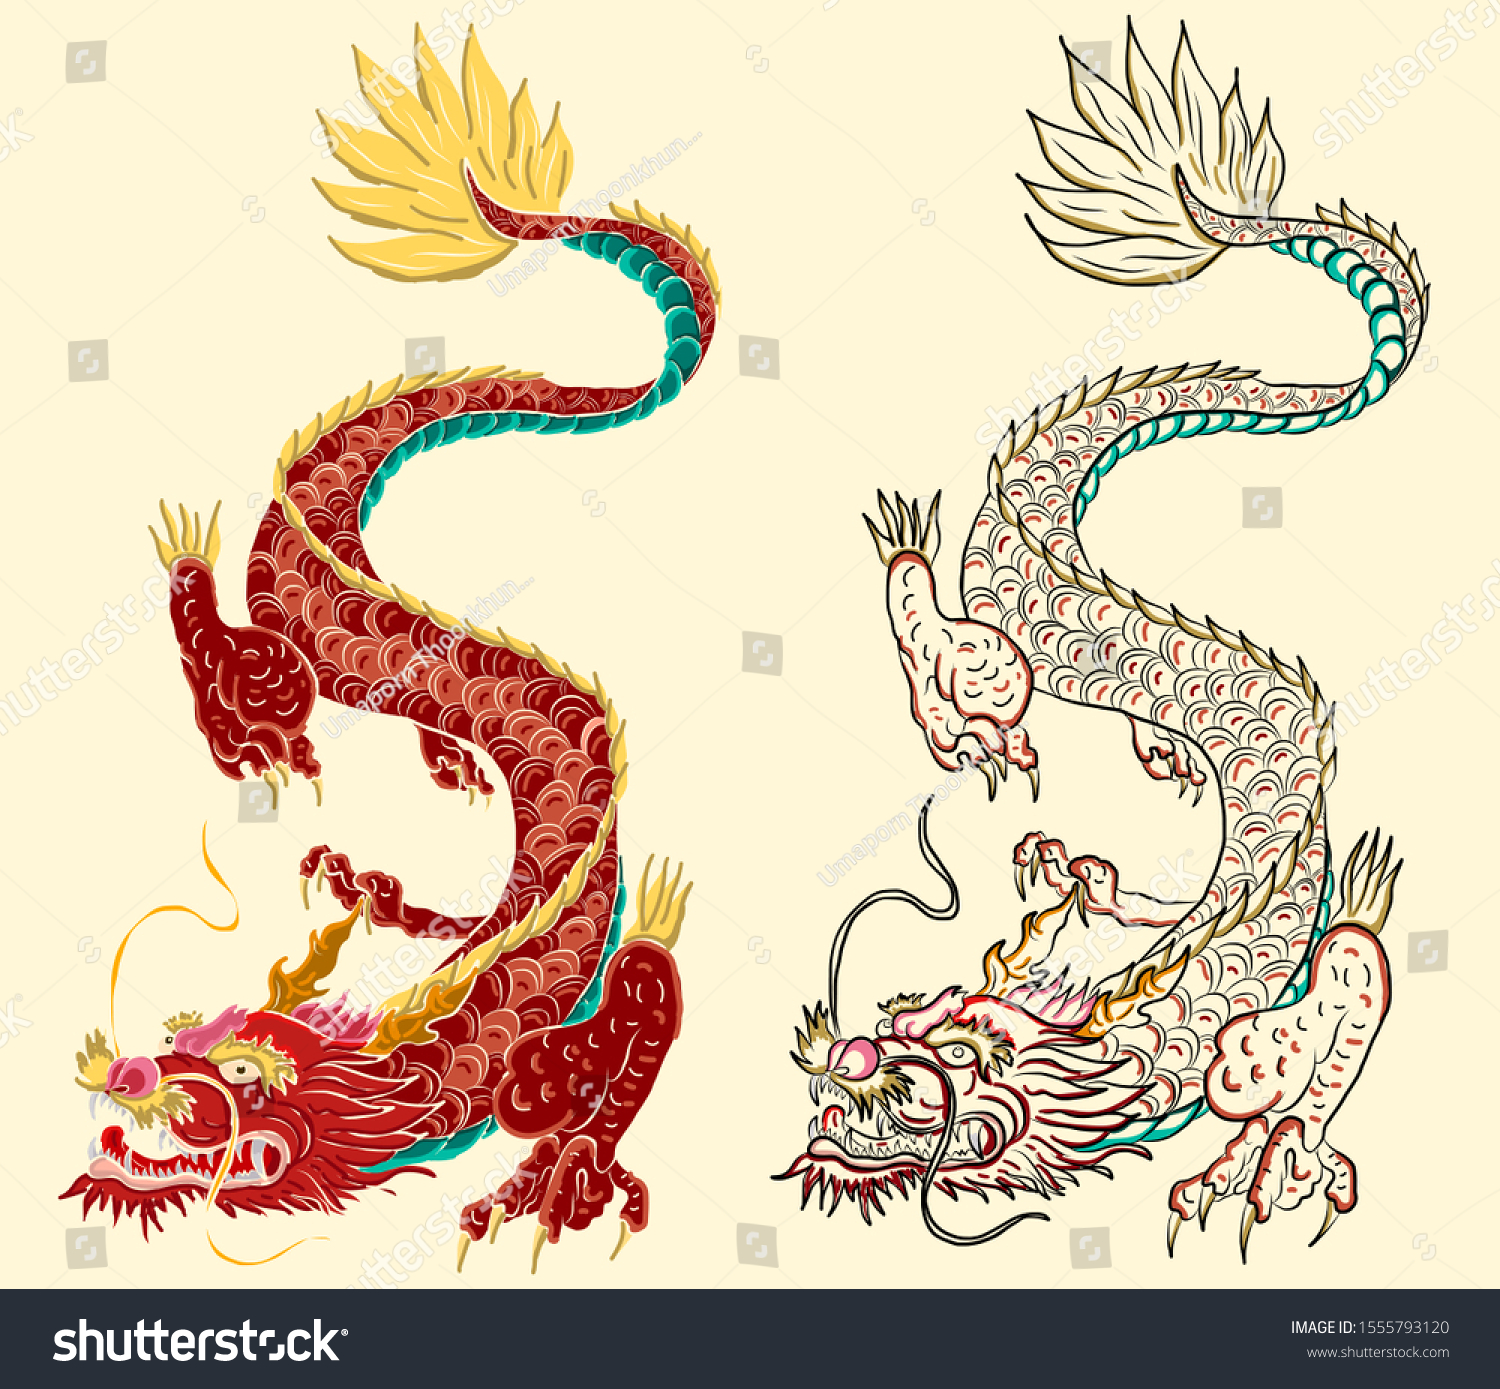 Outline Chinese Dragon Illustration Tattoo Design Stock Vector Royalty Free